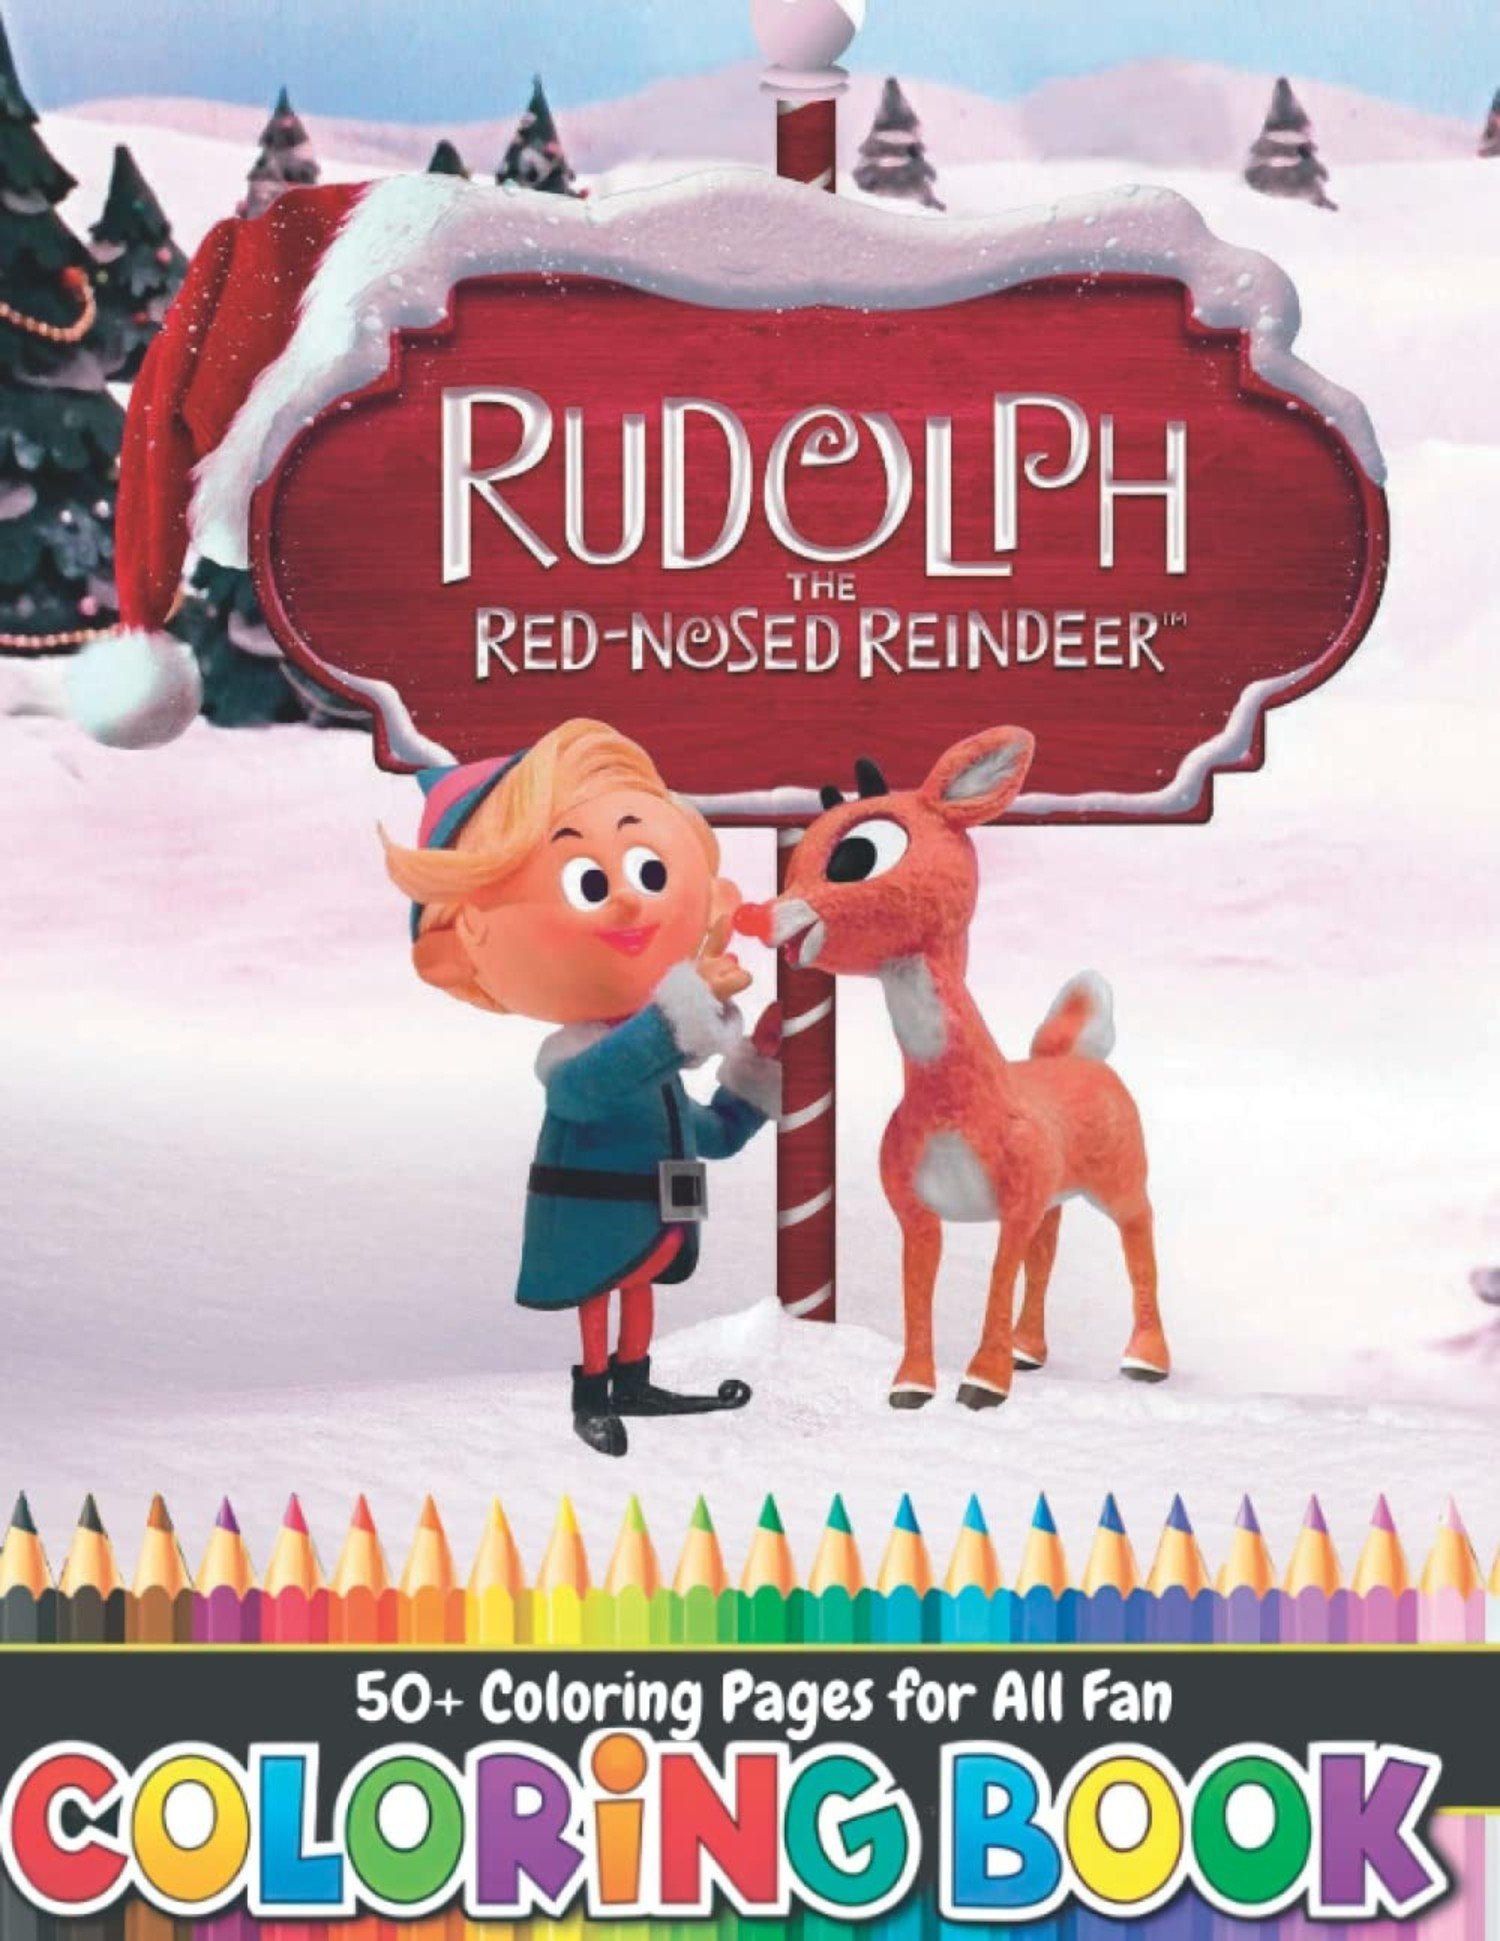 Rudolph the red nosed reindeer coloring book exclusive images activity book for kids with reindeer santa claus elfs and yeti by jason z smither